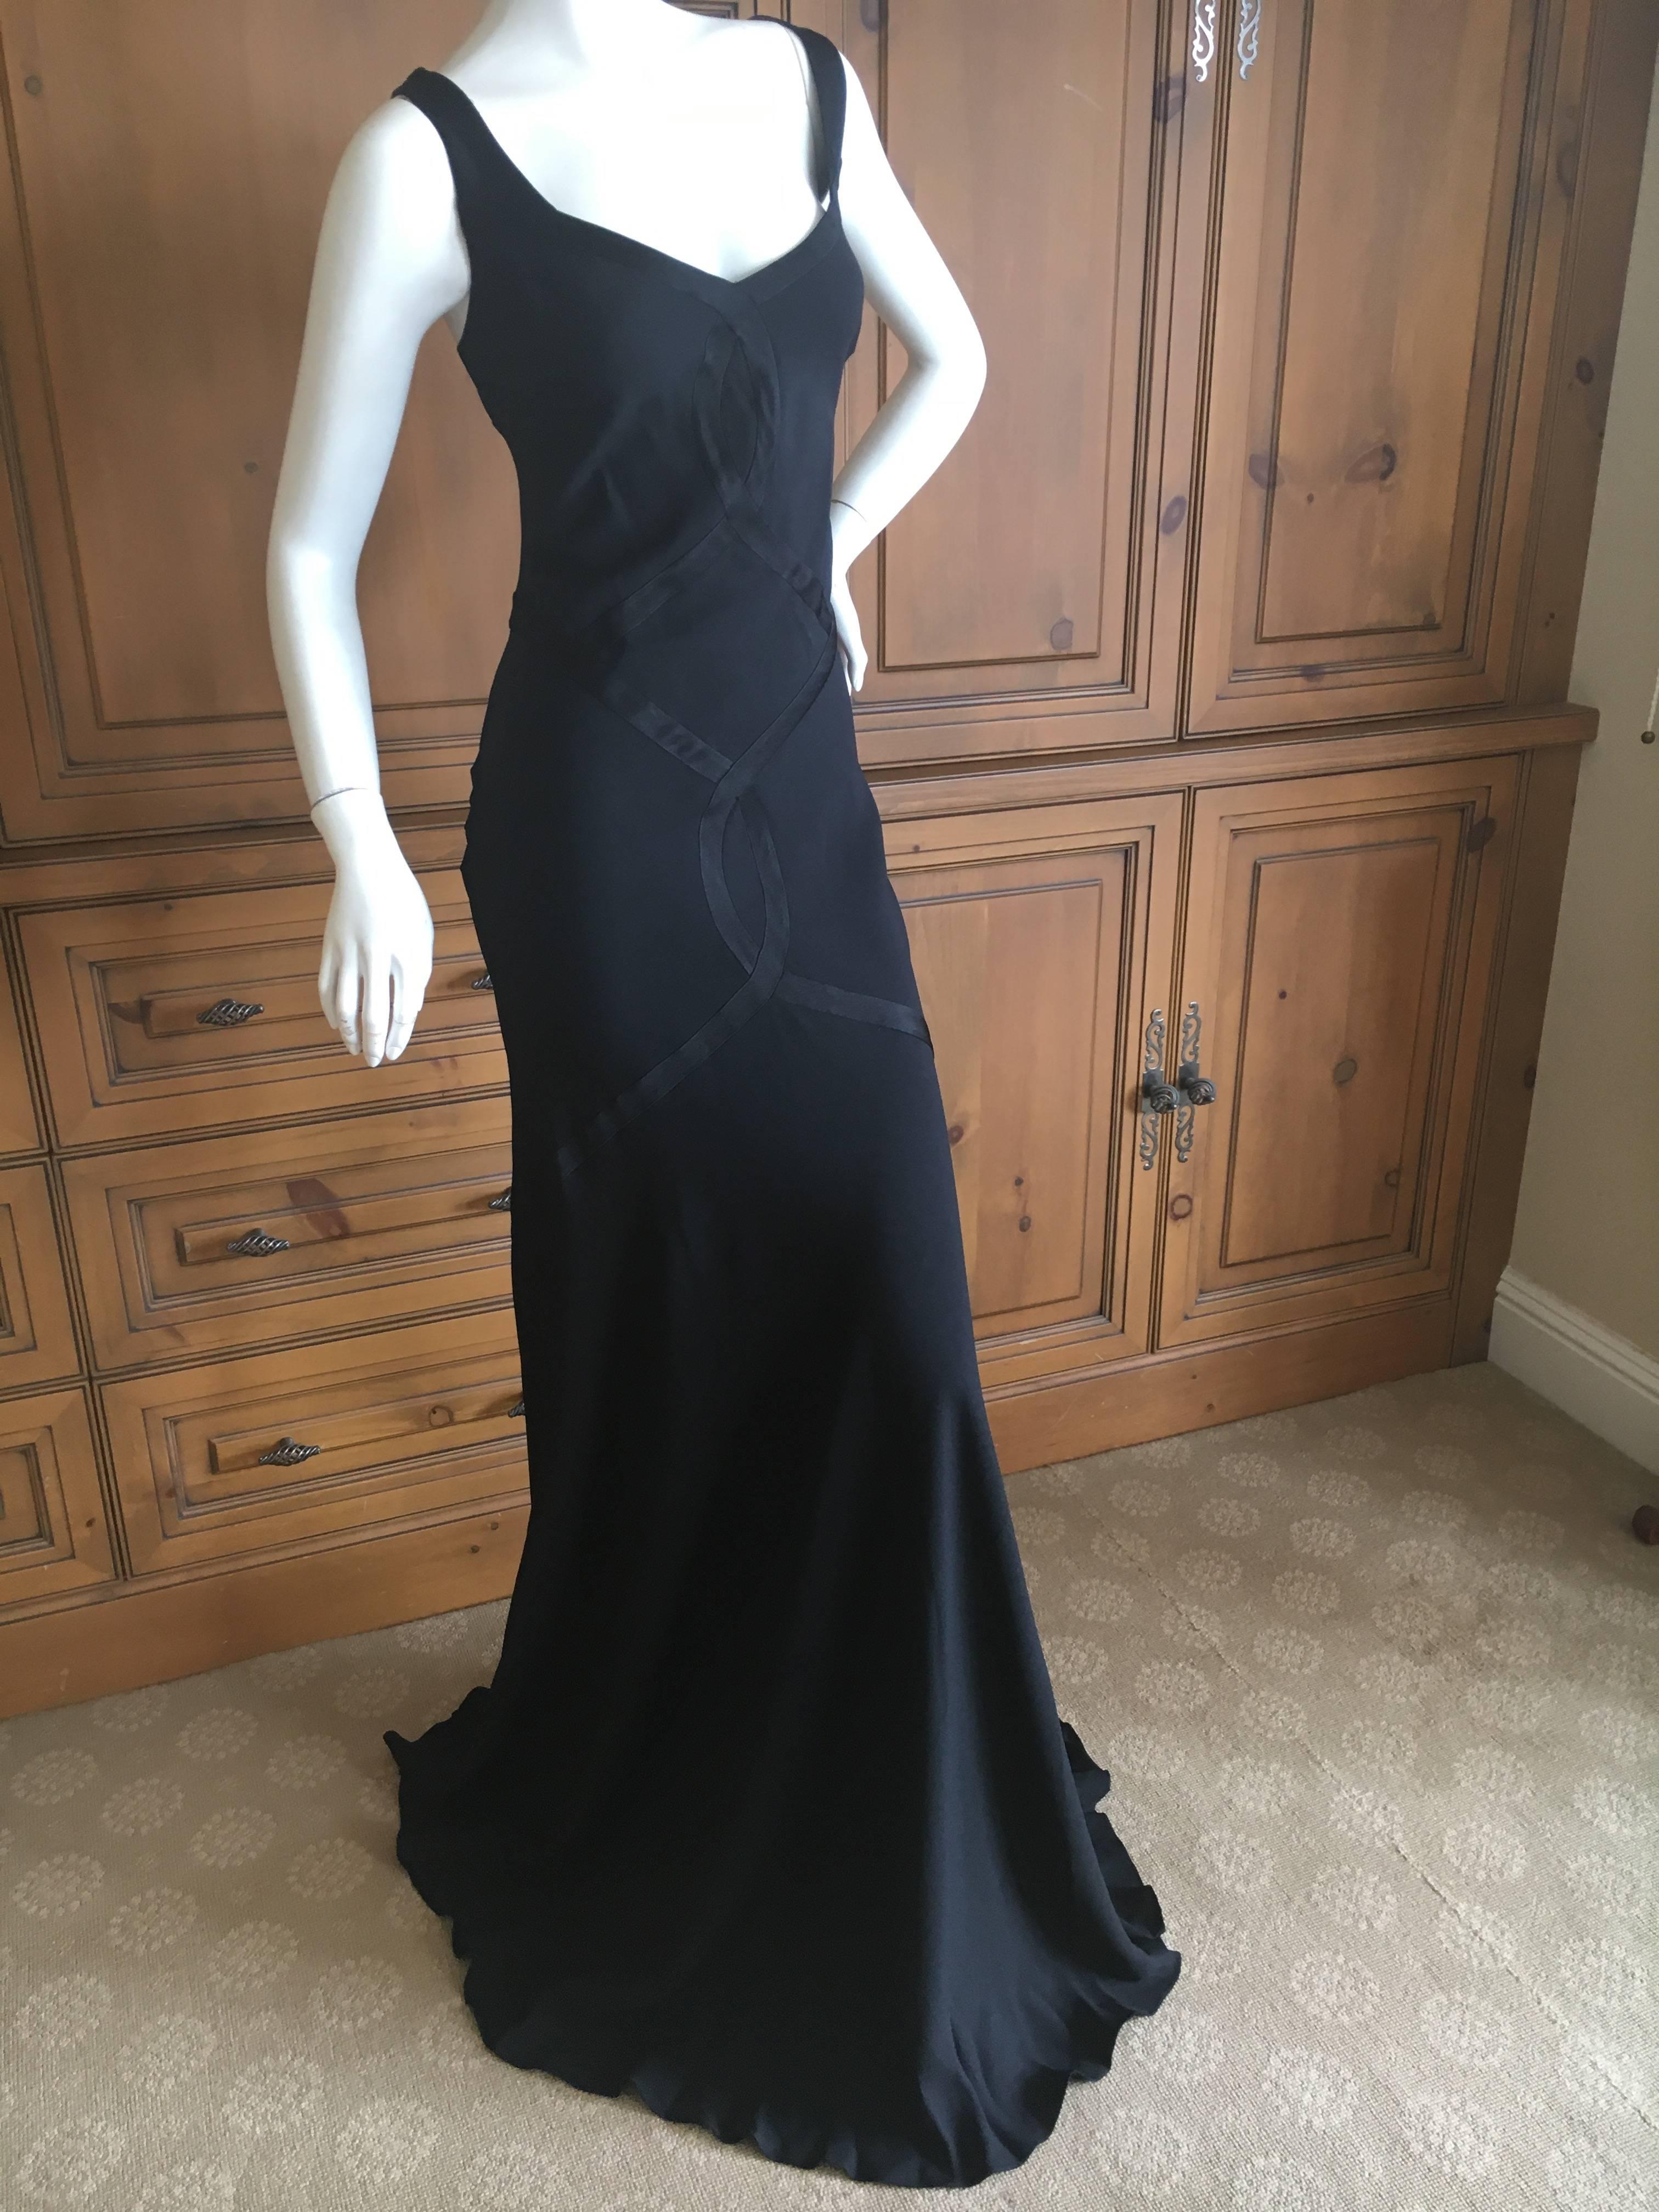 Women's John Galliano 2001 Black Bias Cut Evening Dress with Train New with Tags Size 46 For Sale